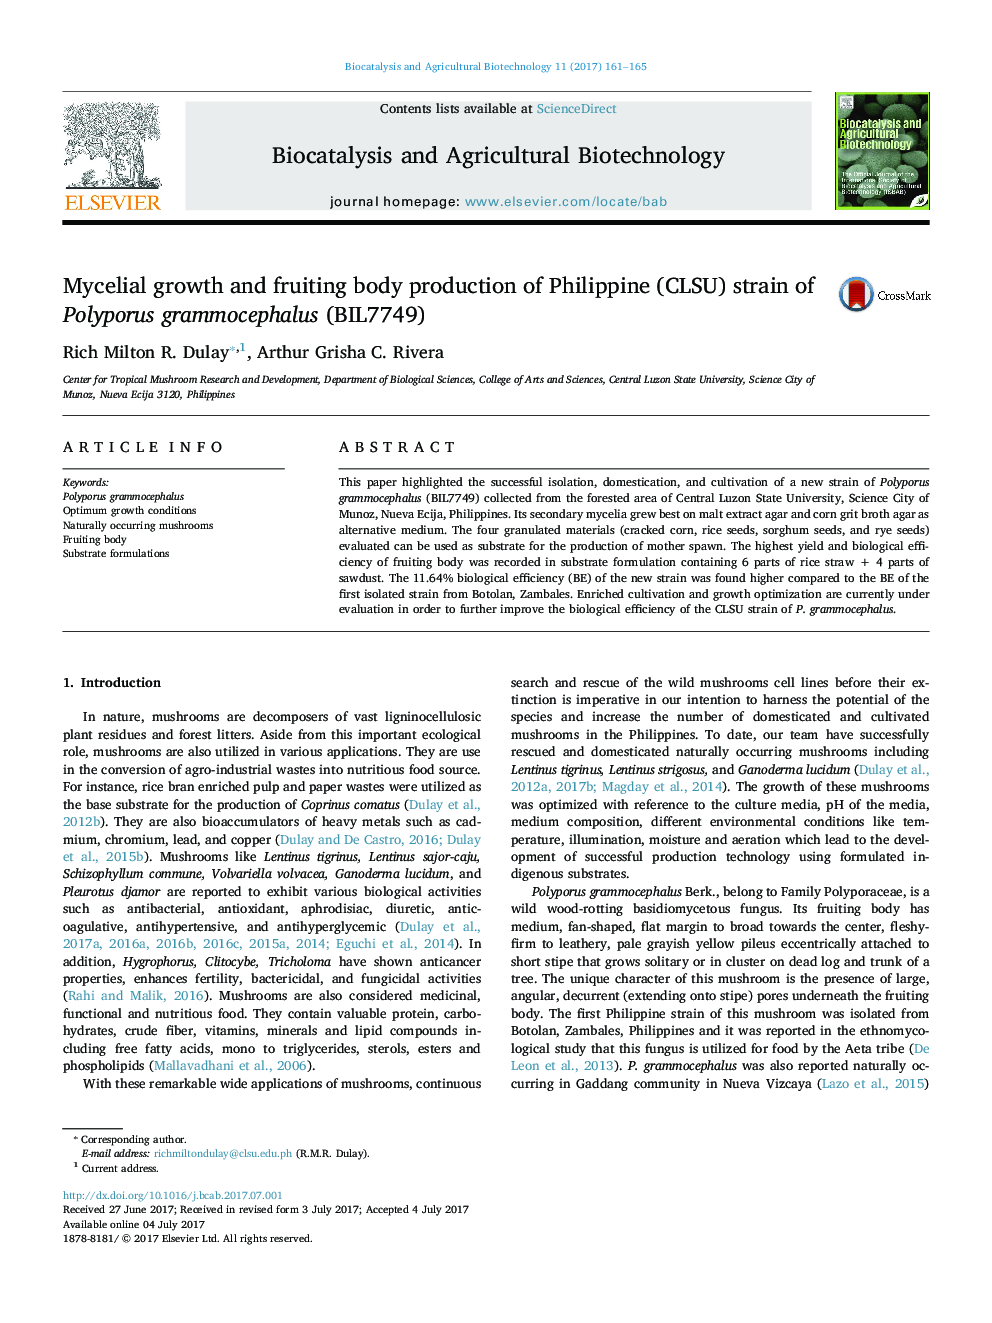 Mycelial growth and fruiting body production of Philippine (CLSU) strain of Polyporus grammocephalus (BIL7749)